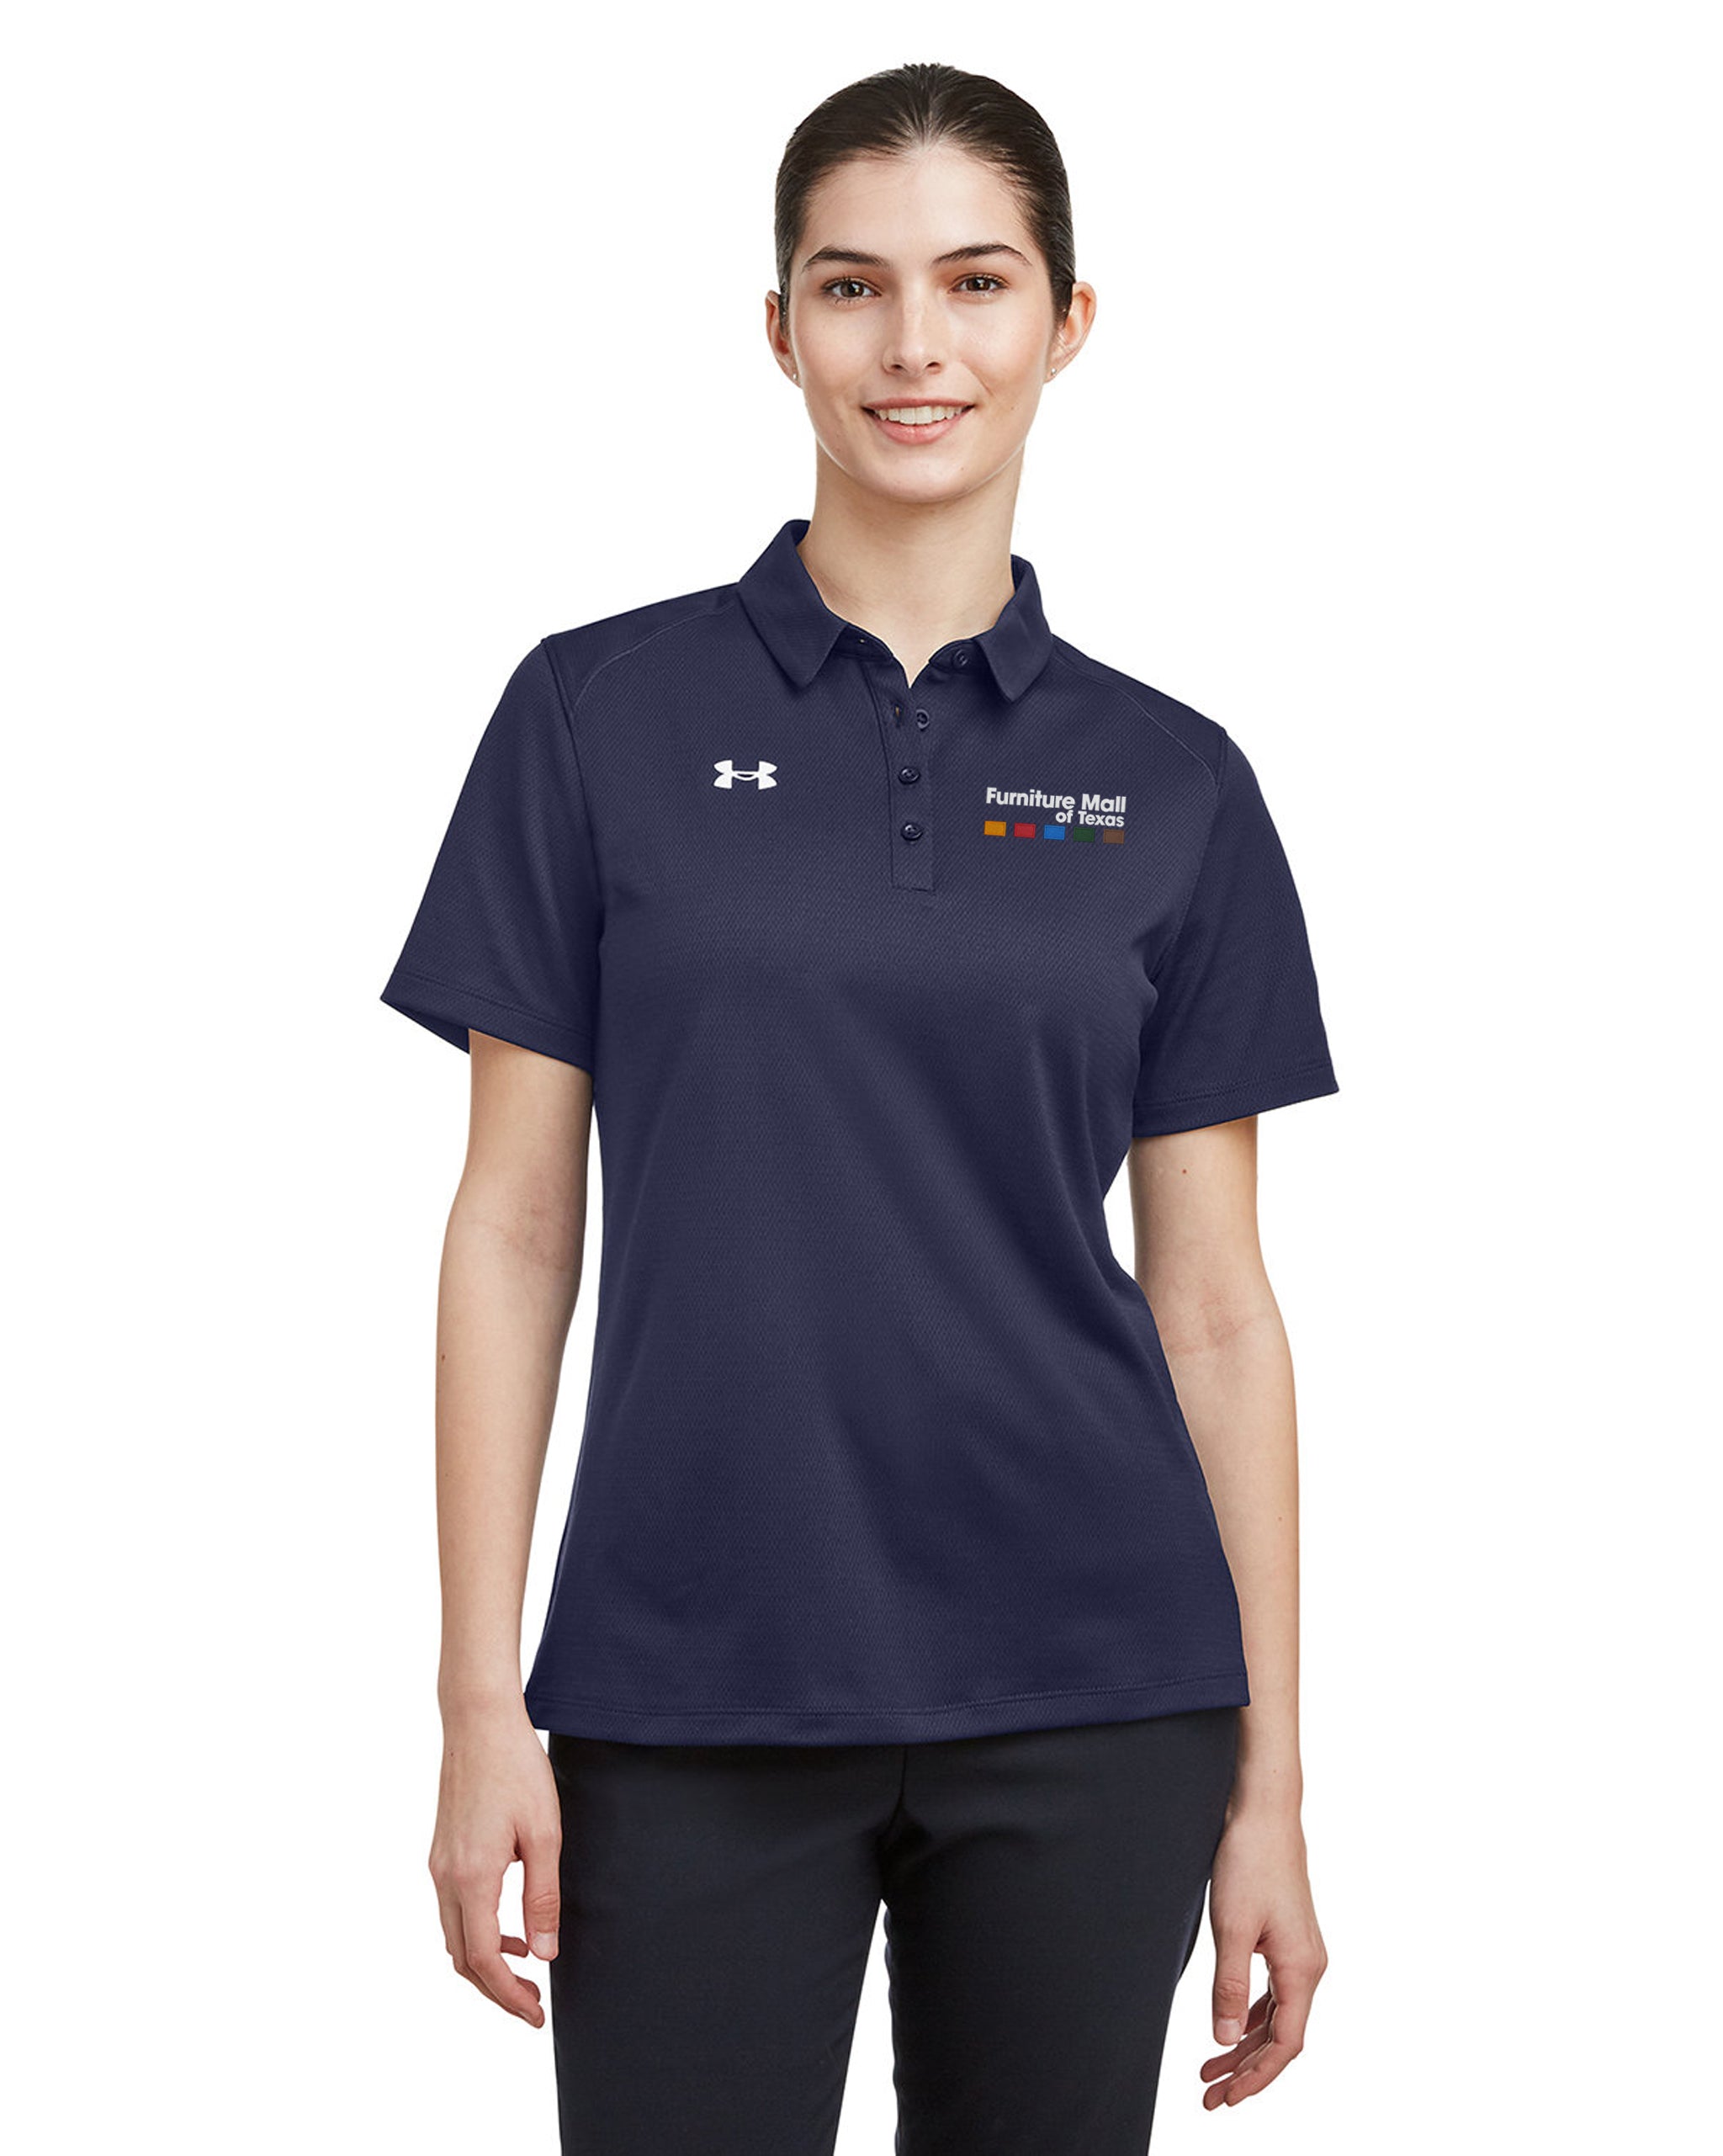 Furniture Mall of Texas - Under Armour Ladies' Tech Polo - 1370431